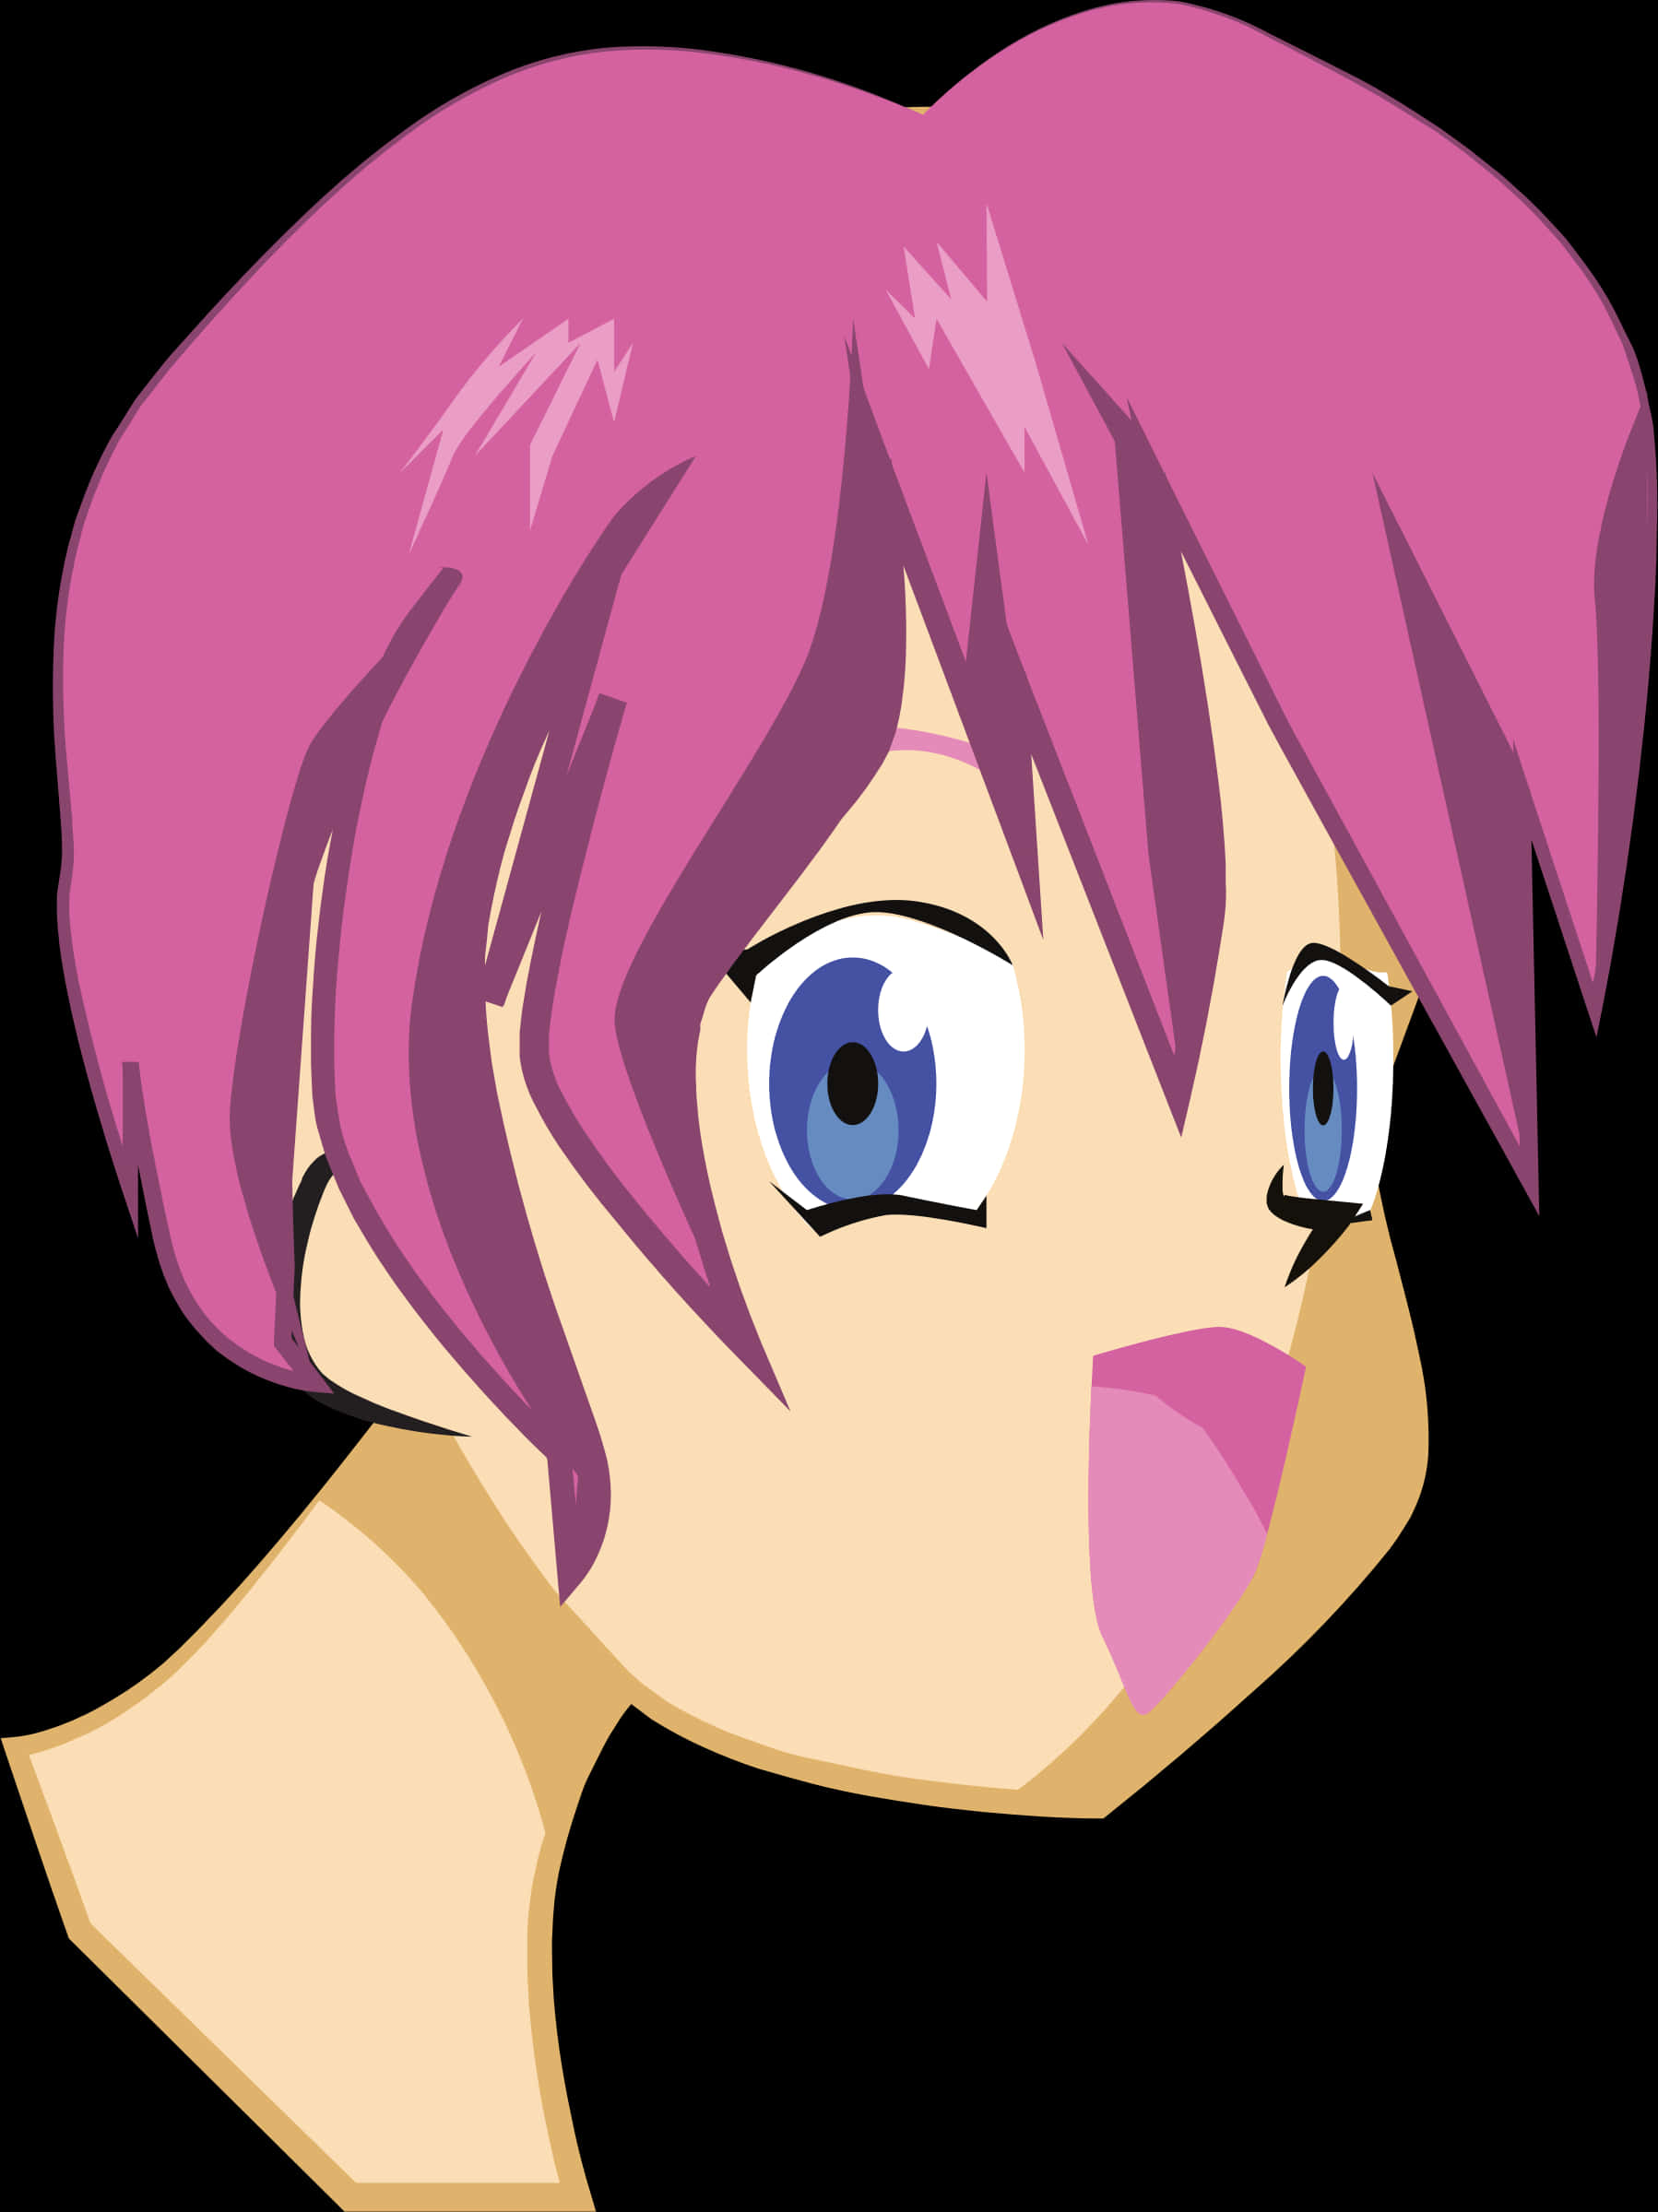 Cartoon Of A Person With Pink Hair